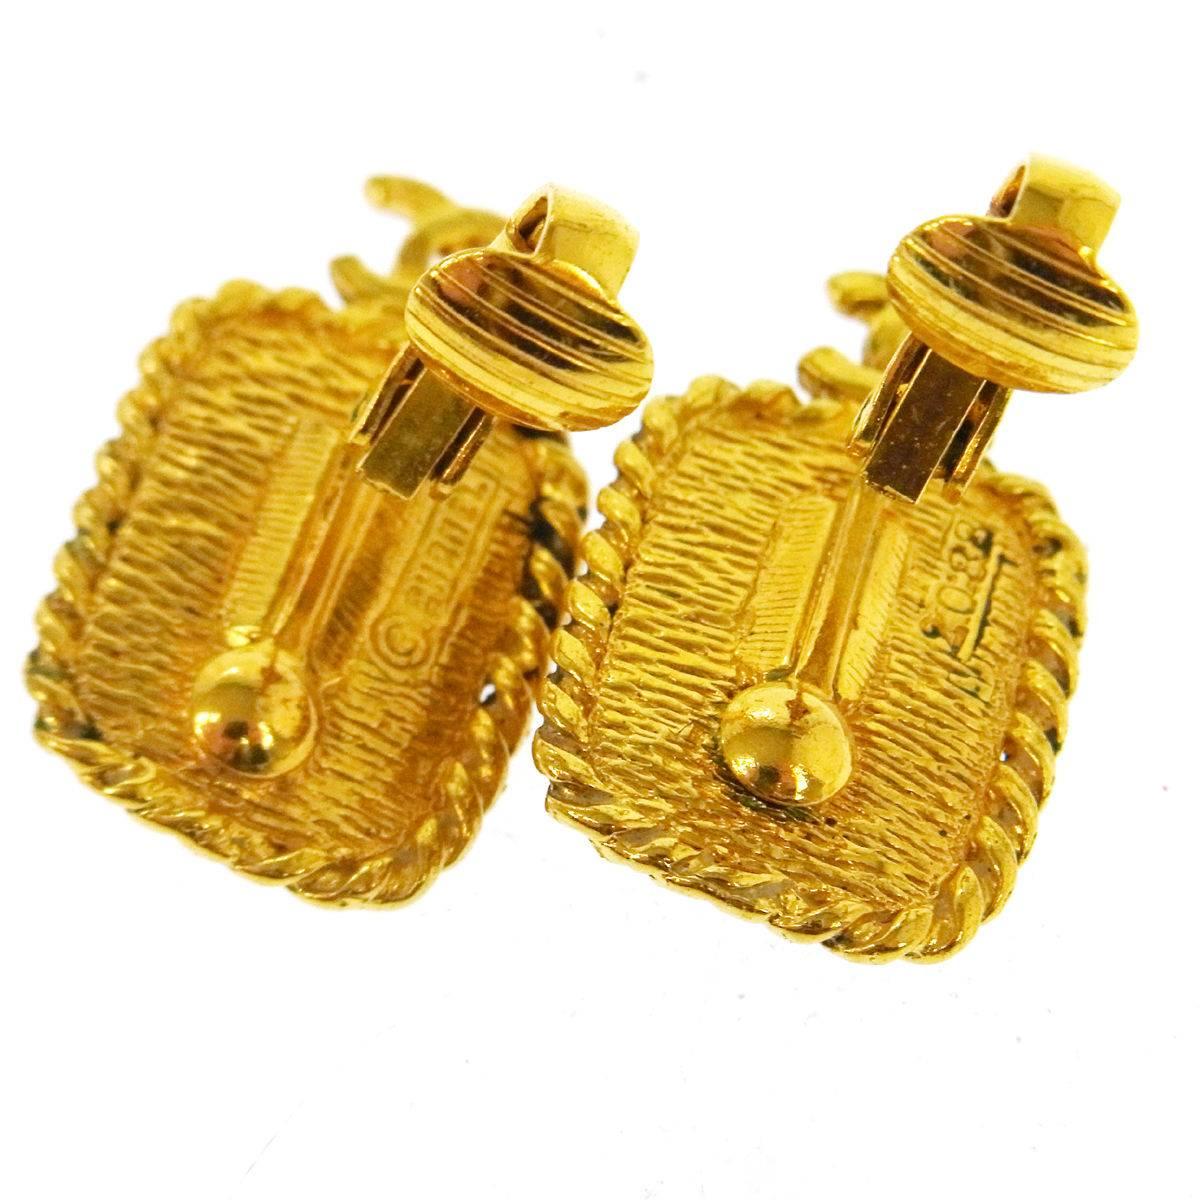 CURATOR'S NOTES

Metal
Gold tone
Gripoix 
Clip on closure 
Width 0.6